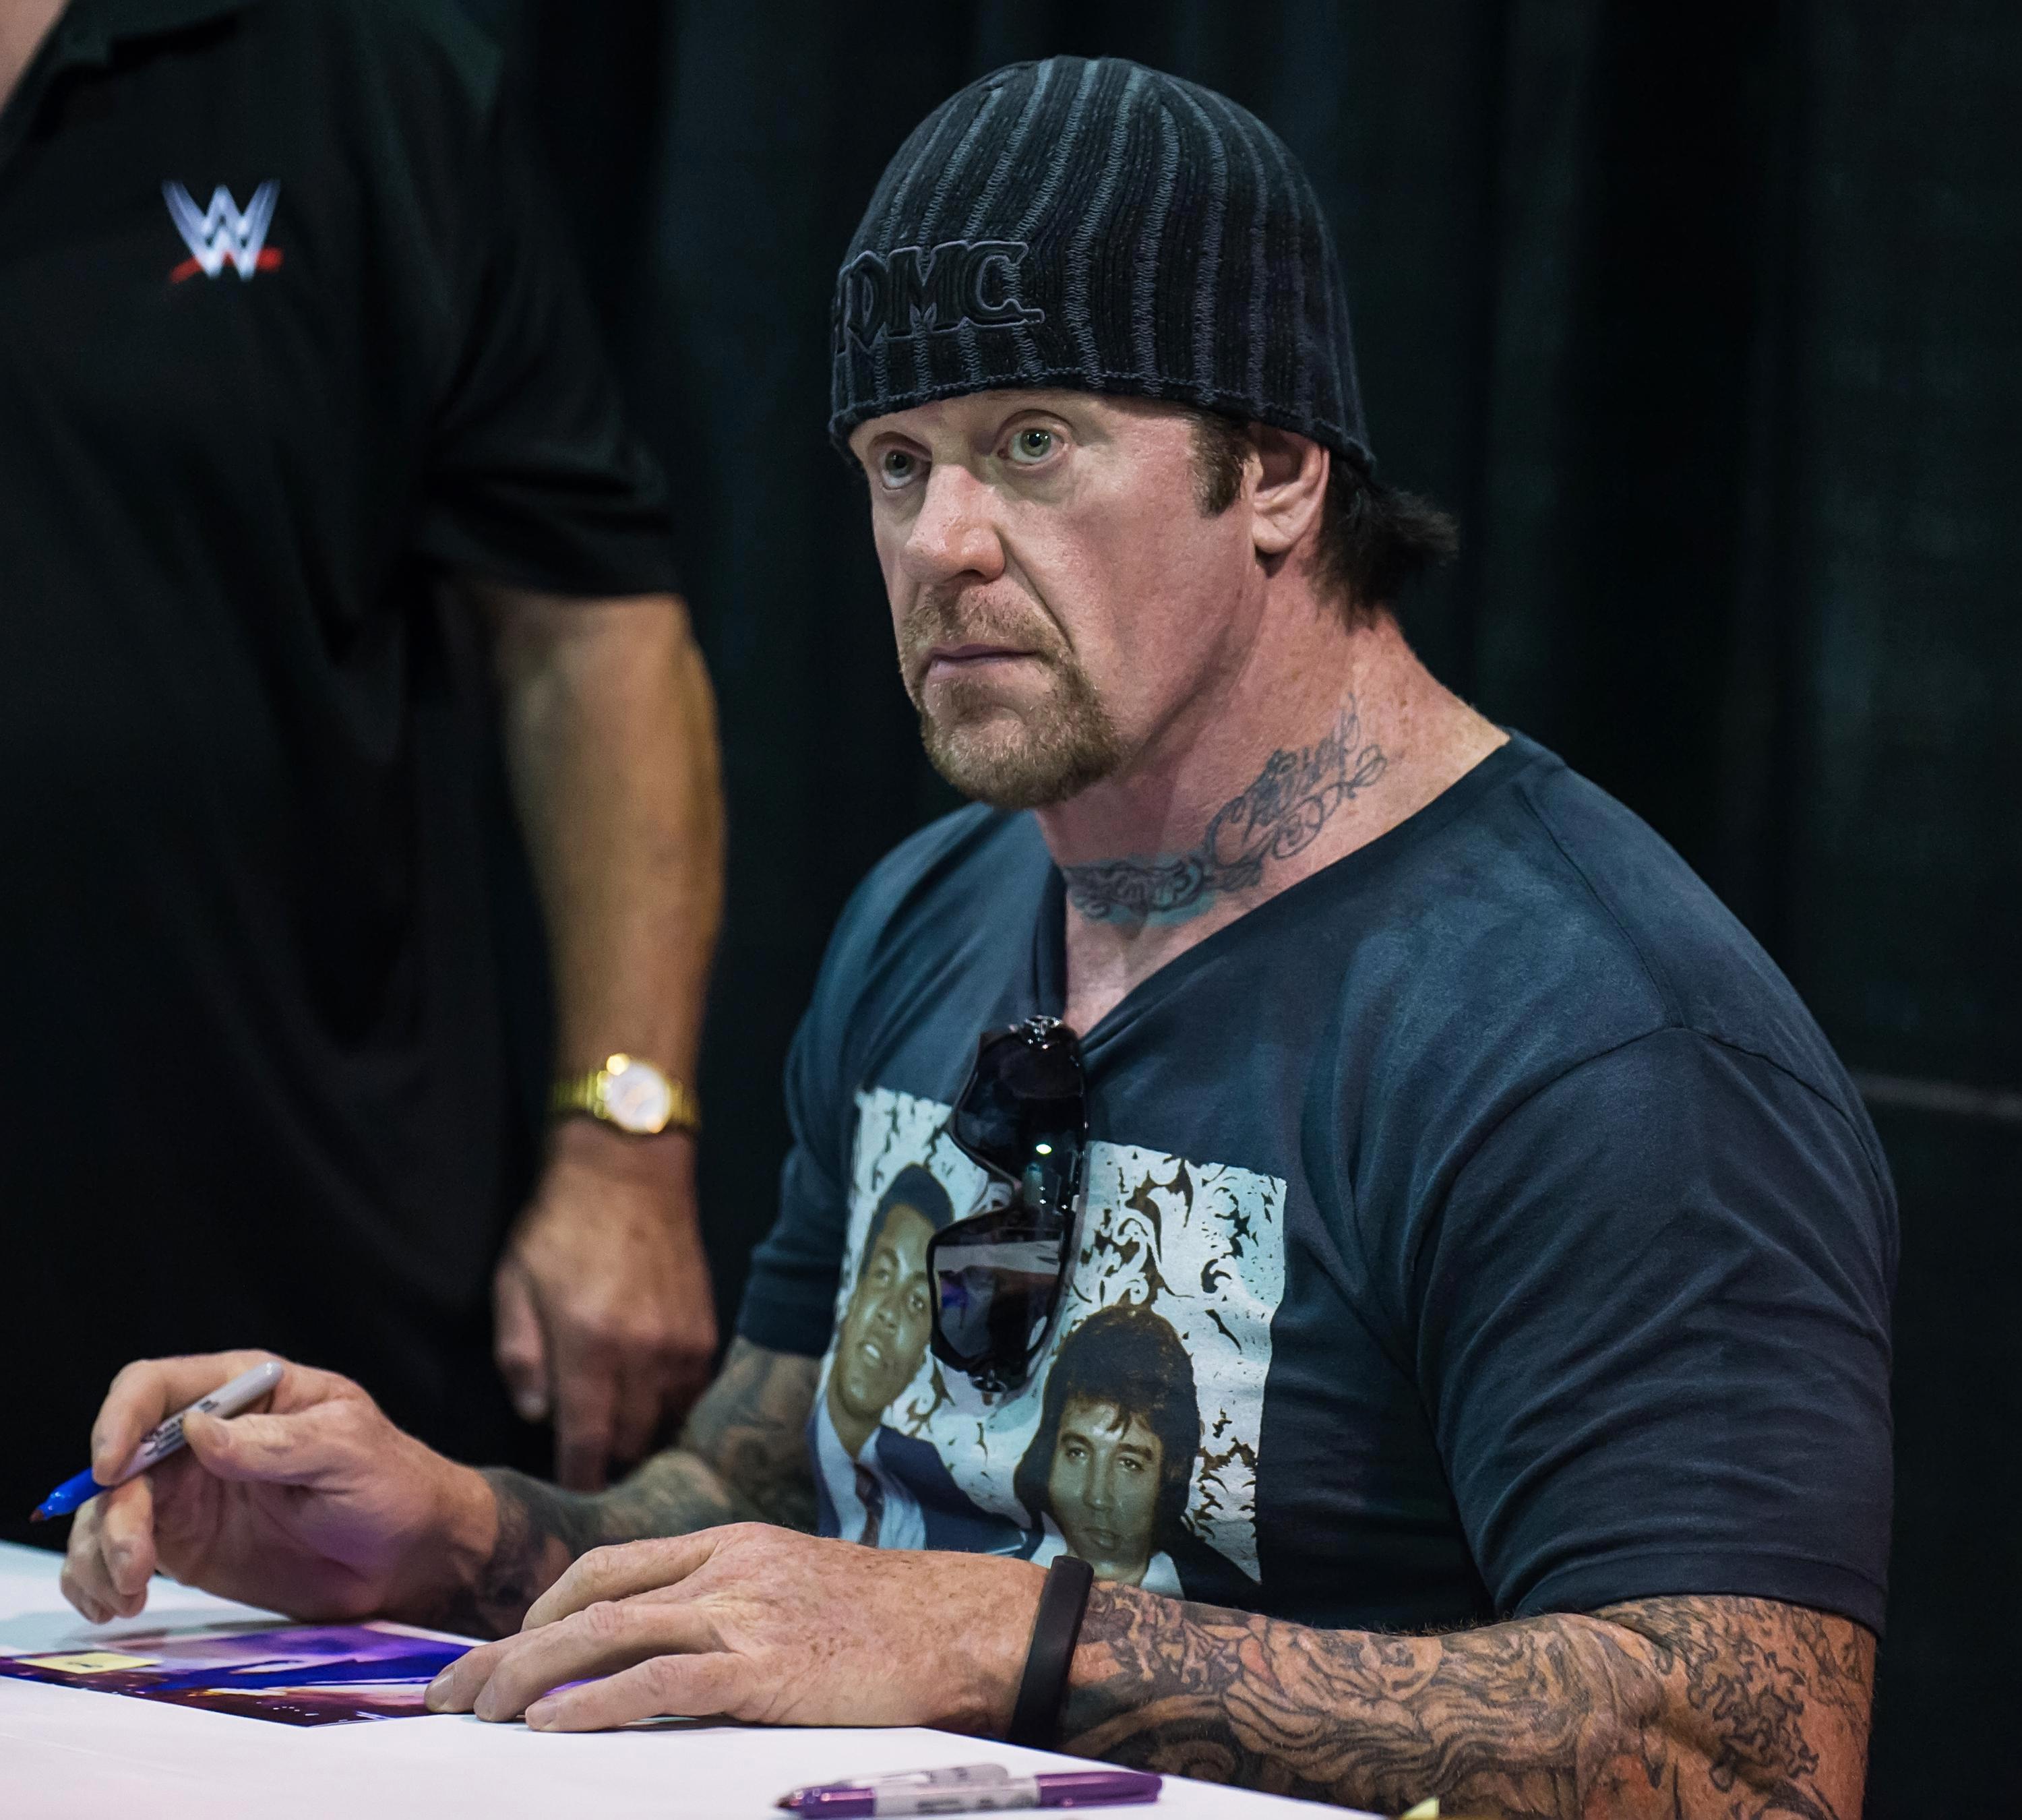 Who is The Undertaker, was there more than one and is the WWE